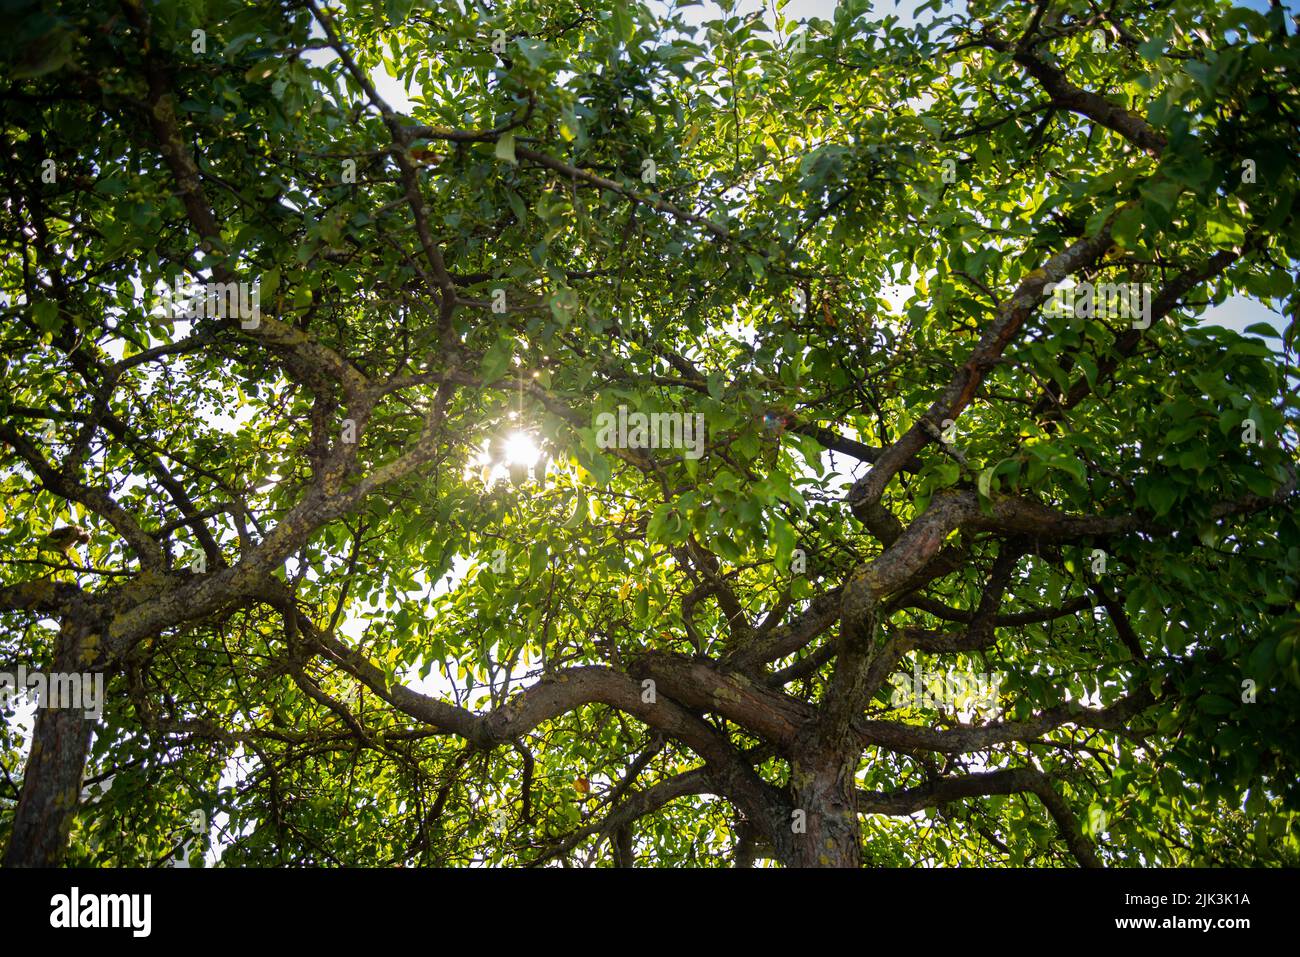 Green blossomed leaves of a tree through which the rays of the evening summer sun shine. Stock Photo